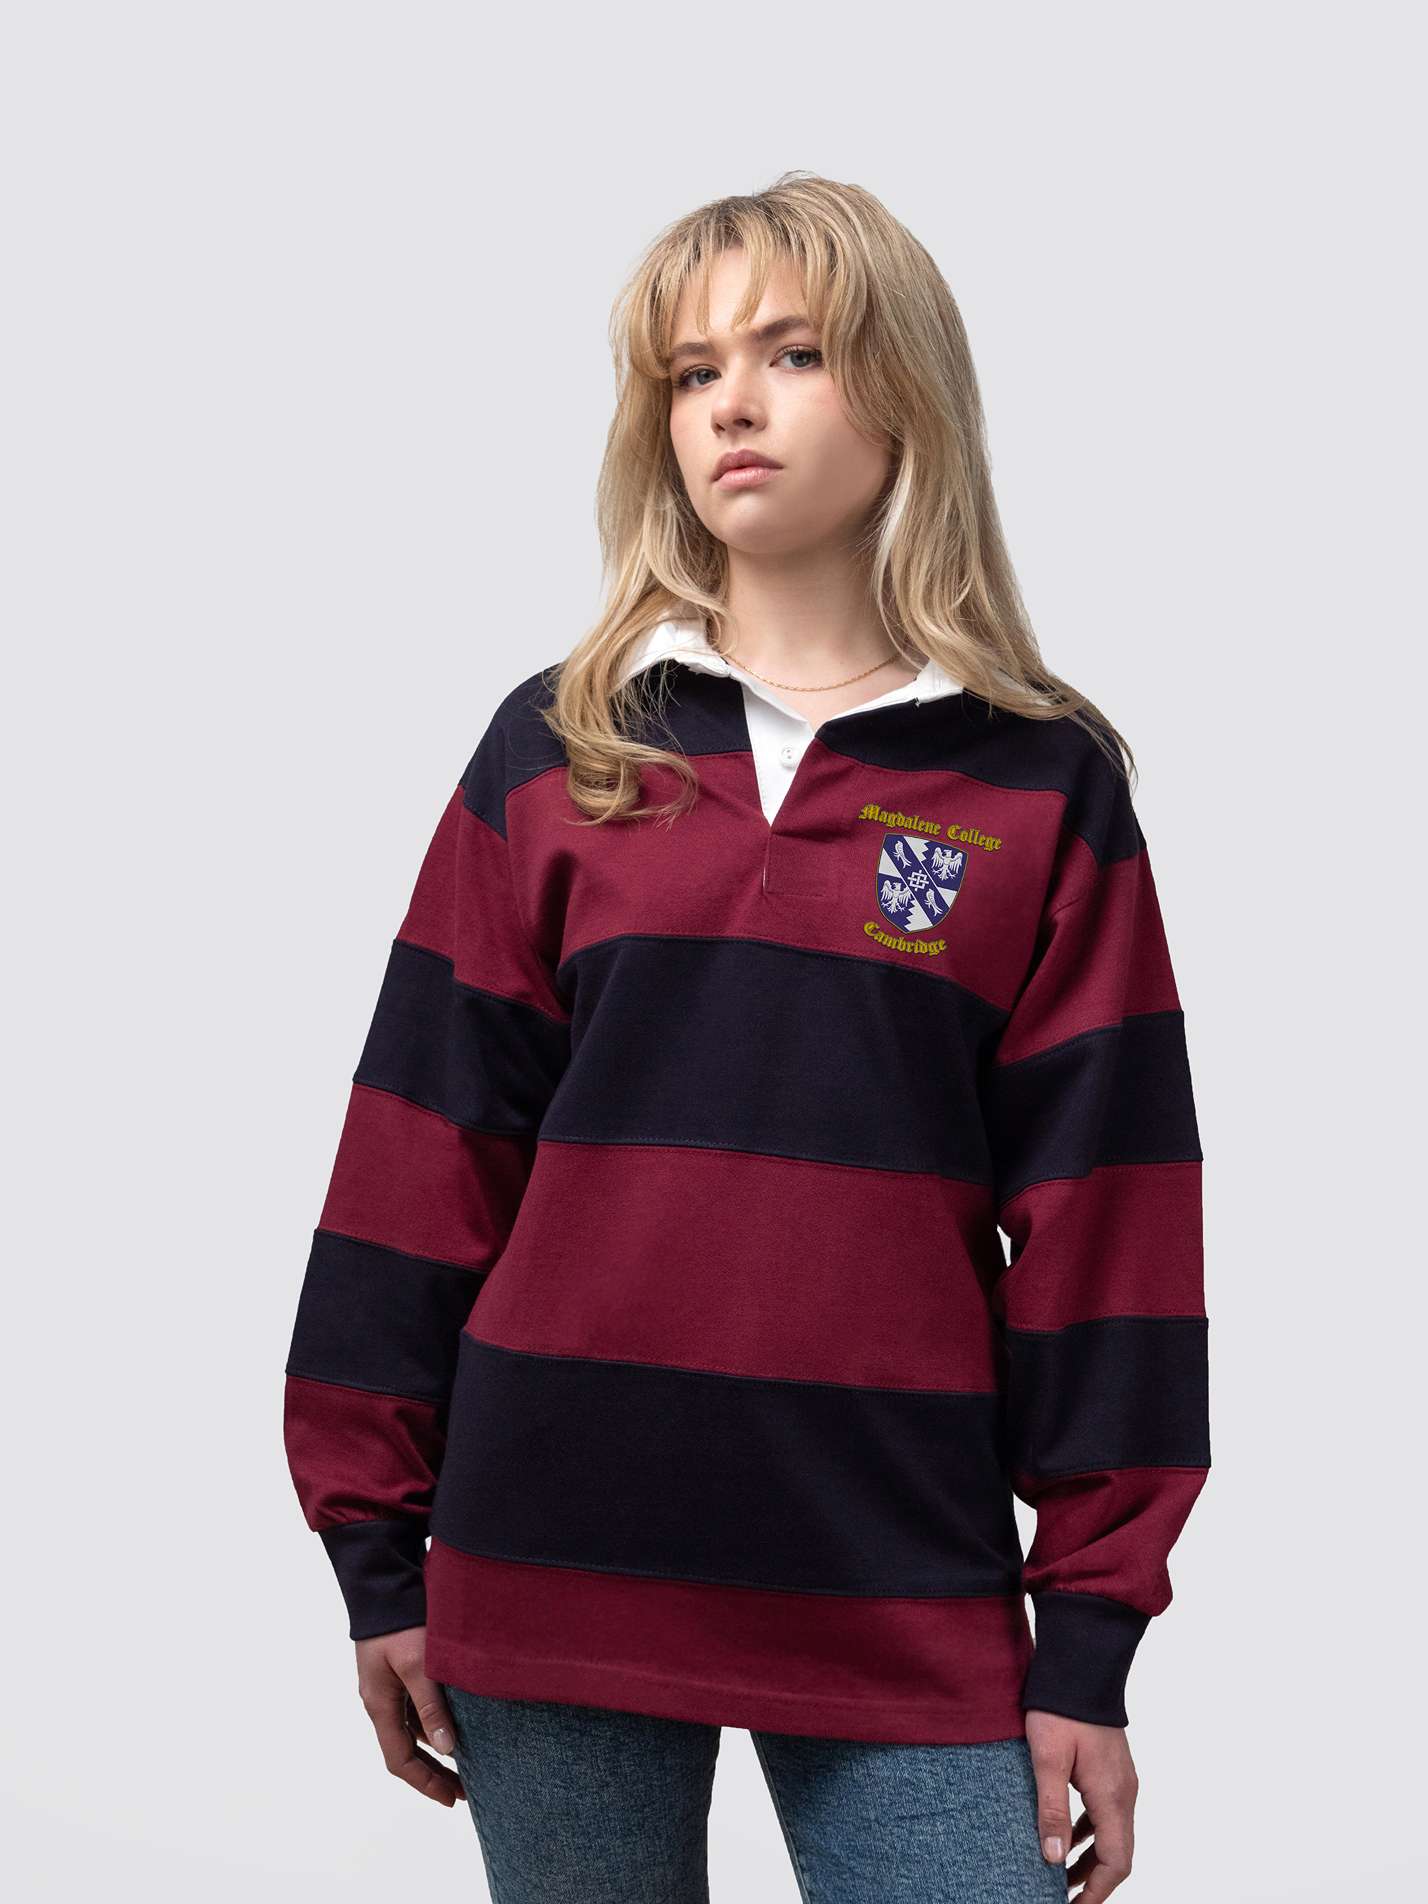 Magdalene College rugby shirt, with burgundy and navy stripes